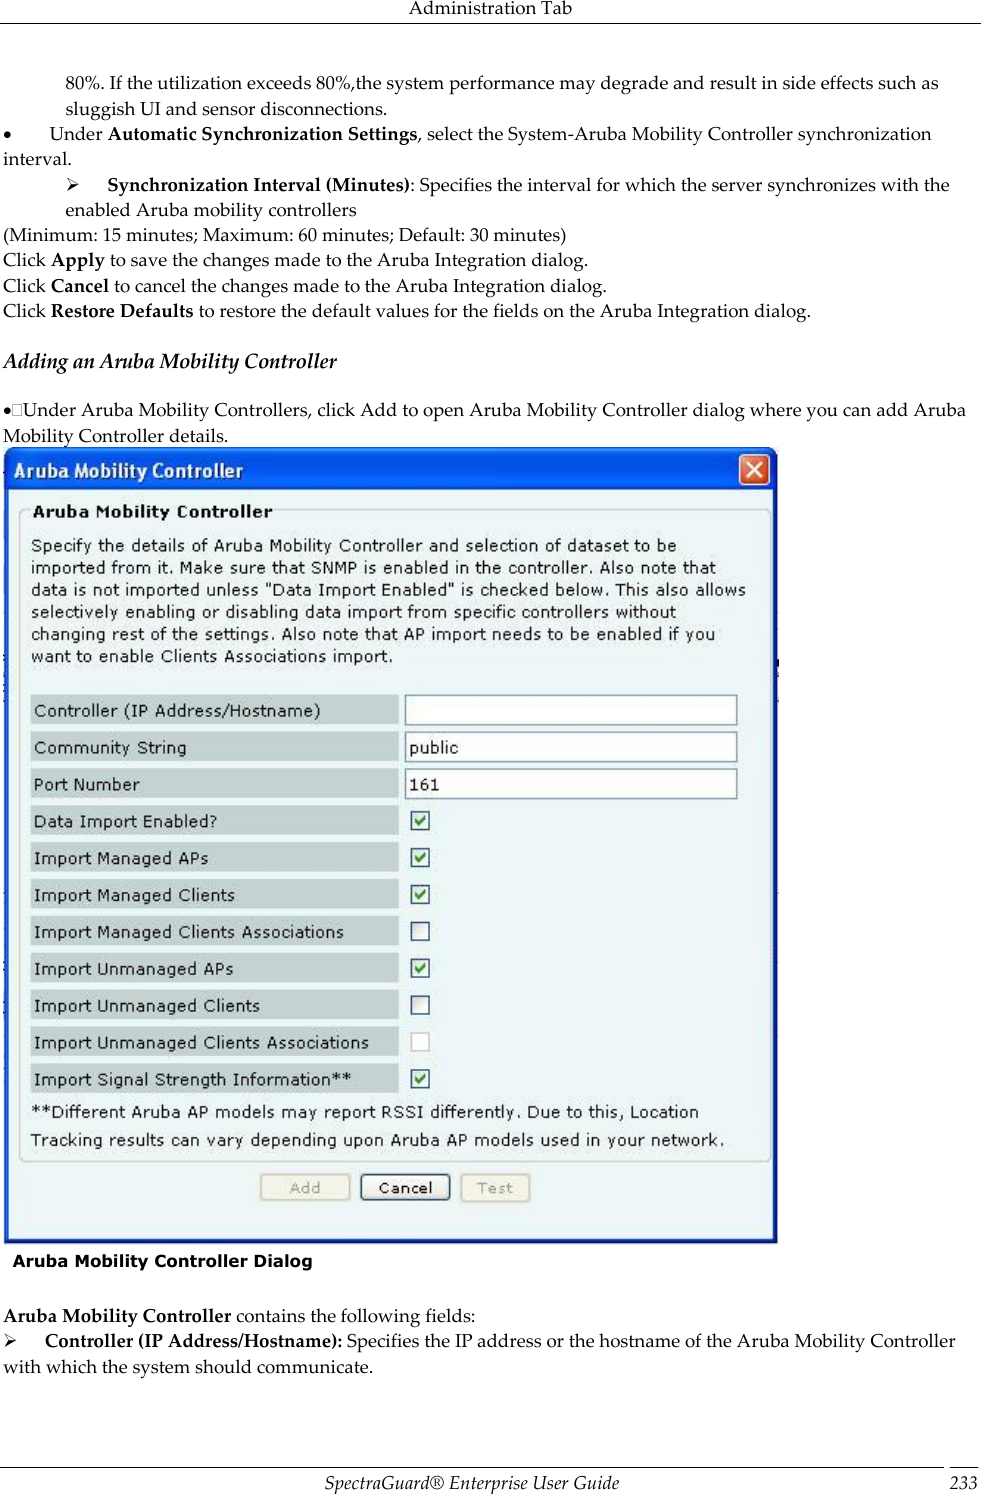 Administration Tab SpectraGuard®  Enterprise User Guide 233 80%. If the utilization exceeds 80%,the system performance may degrade and result in side effects such as sluggish UI and sensor disconnections.           Under Automatic Synchronization Settings, select the System-Aruba Mobility Controller synchronization interval.        Synchronization Interval (Minutes): Specifies the interval for which the server synchronizes with the enabled Aruba mobility controllers (Minimum: 15 minutes; Maximum: 60 minutes; Default: 30 minutes) Click Apply to save the changes made to the Aruba Integration dialog. Click Cancel to cancel the changes made to the Aruba Integration dialog. Click Restore Defaults to restore the default values for the fields on the Aruba Integration dialog. Adding an Aruba Mobility Controller Under Aruba Mobility Controllers, click Add to open Aruba Mobility Controller dialog where you can add Aruba Mobility Controller details.    Aruba Mobility Controller Dialog   Aruba Mobility Controller contains the following fields:        Controller (IP Address/Hostname): Specifies the IP address or the hostname of the Aruba Mobility Controller with which the system should communicate. 